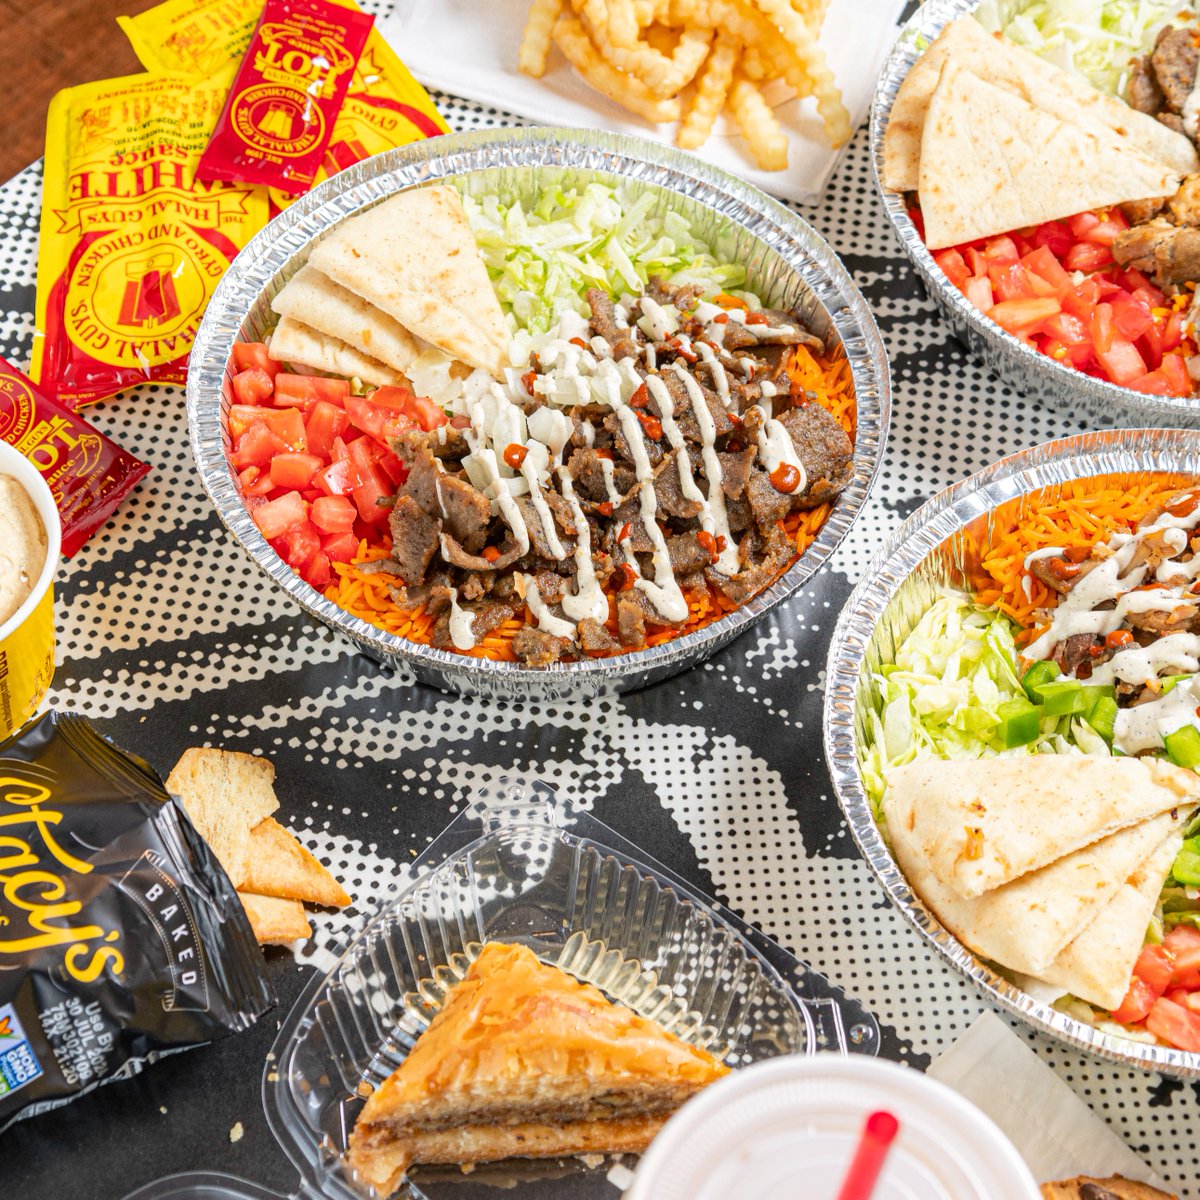 Enjoy The Halal Guys feast with the whole gang! Who are you taking with you? #HalalGuysFeast #thehalalguys #halalfood